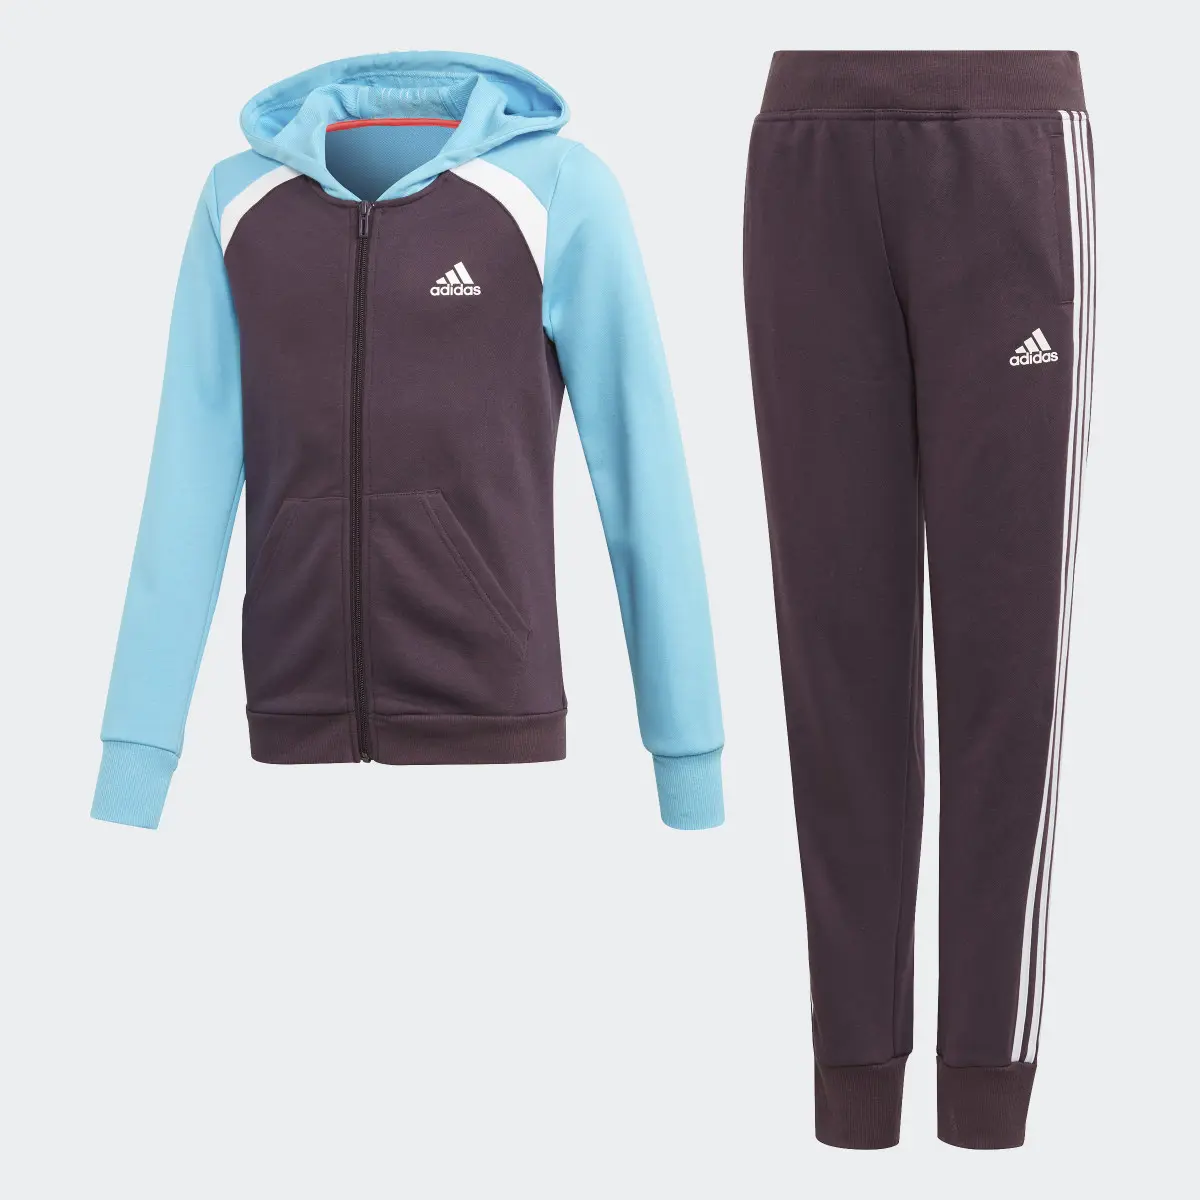 Adidas Hooded Cotton Track Suit. 1